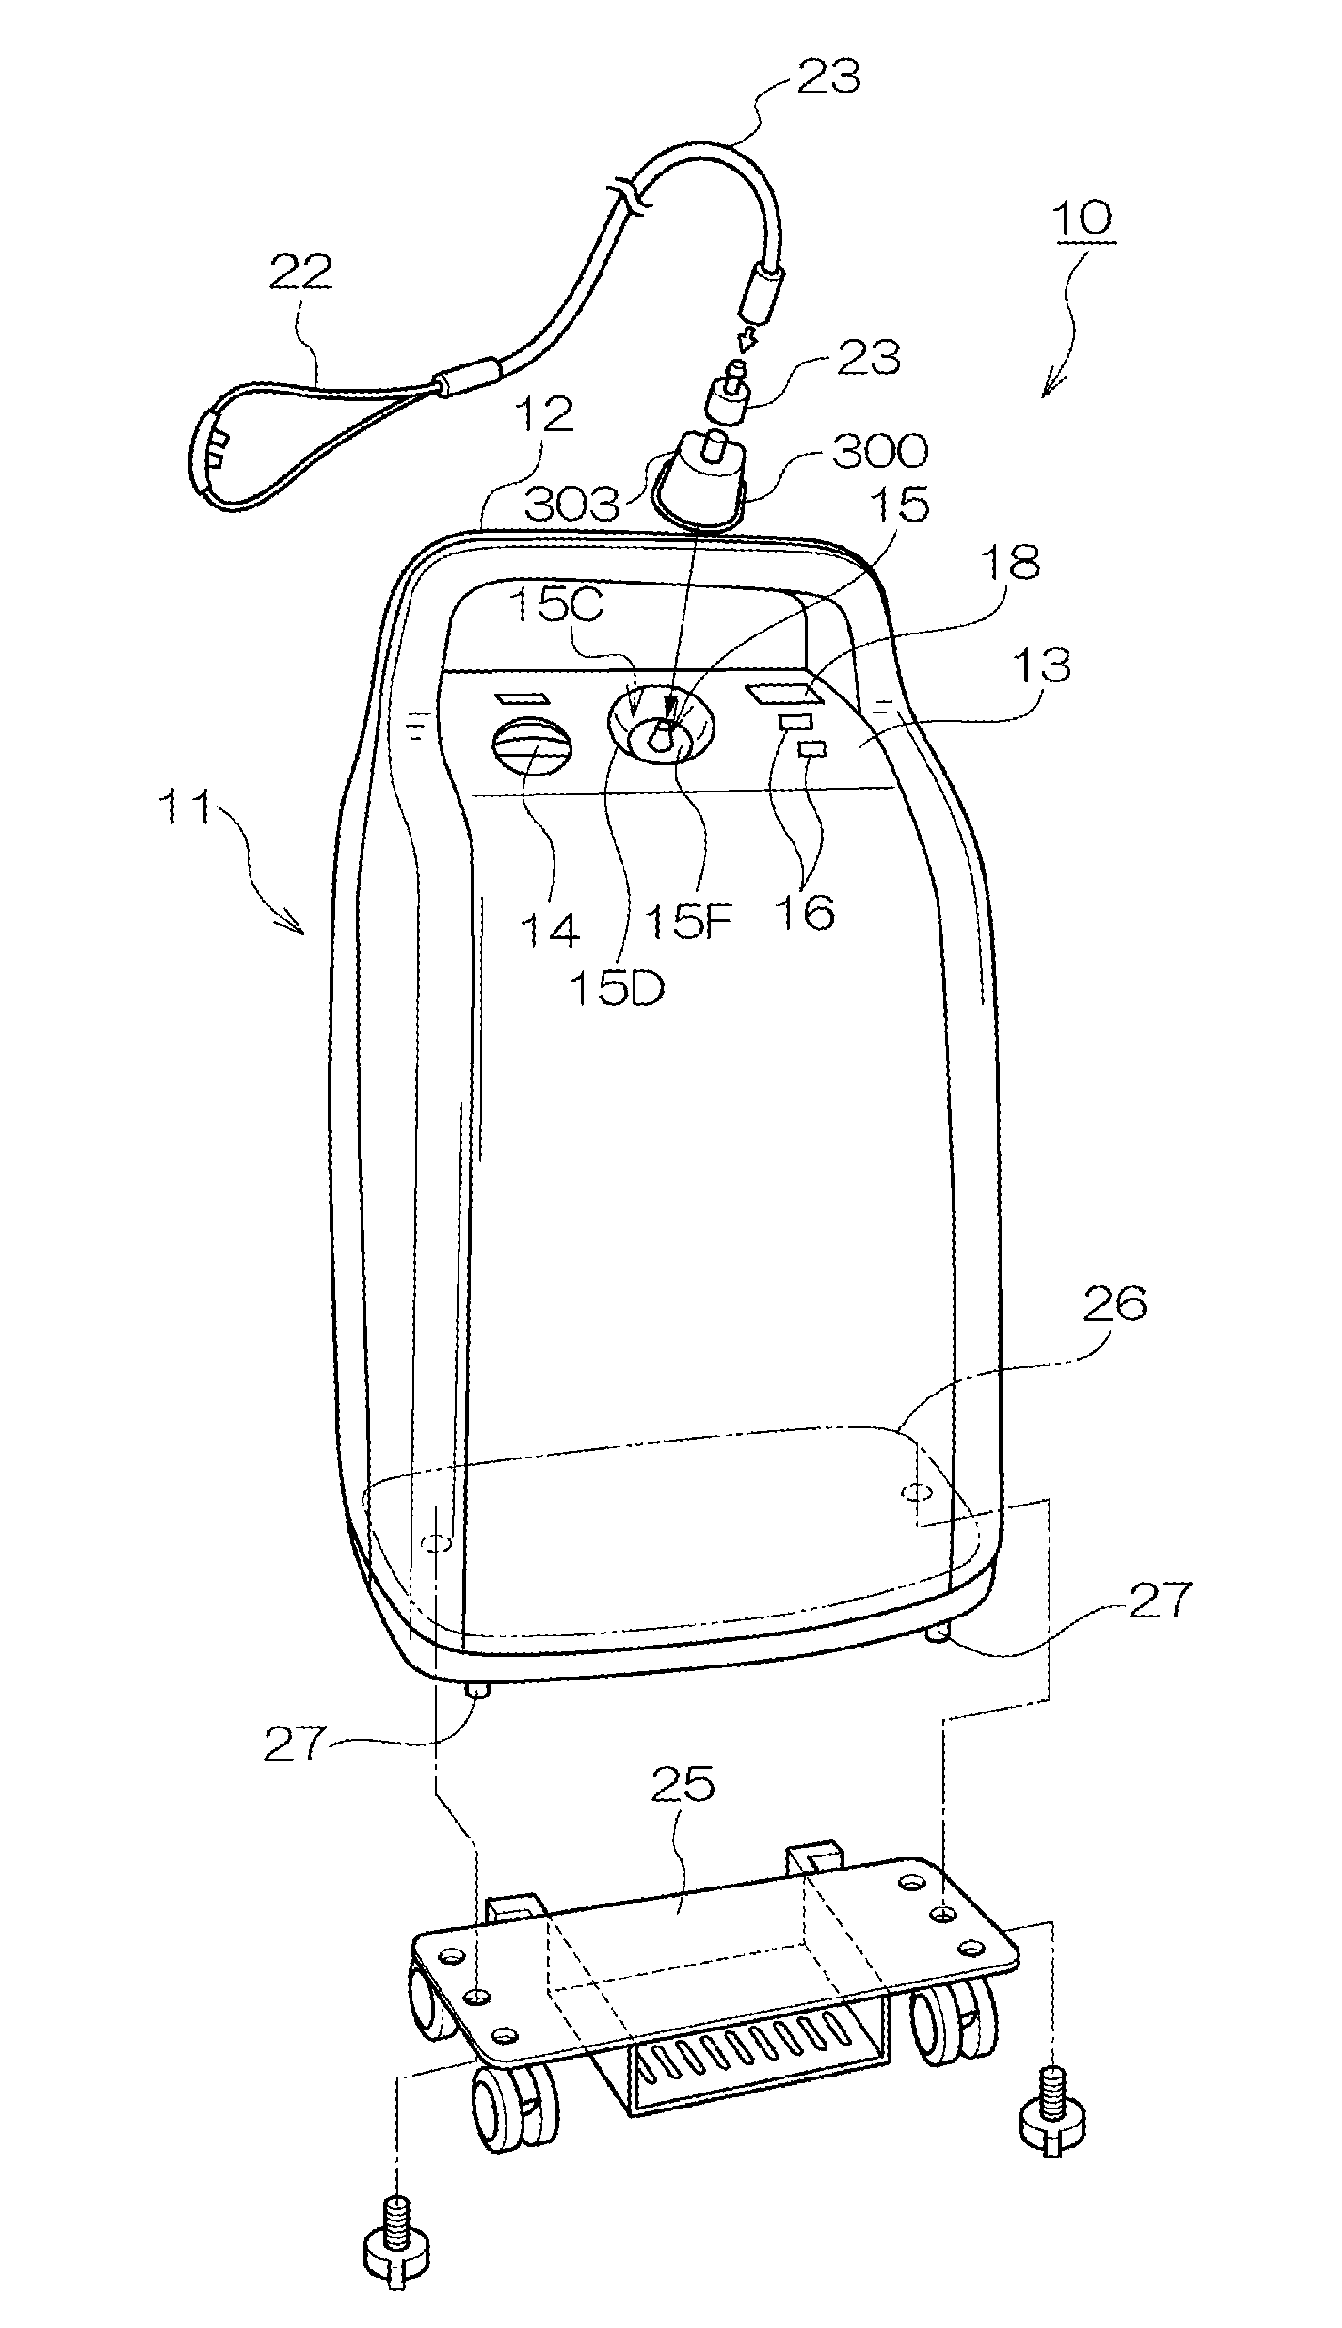 Overheating detection unit and oxygen concentrator